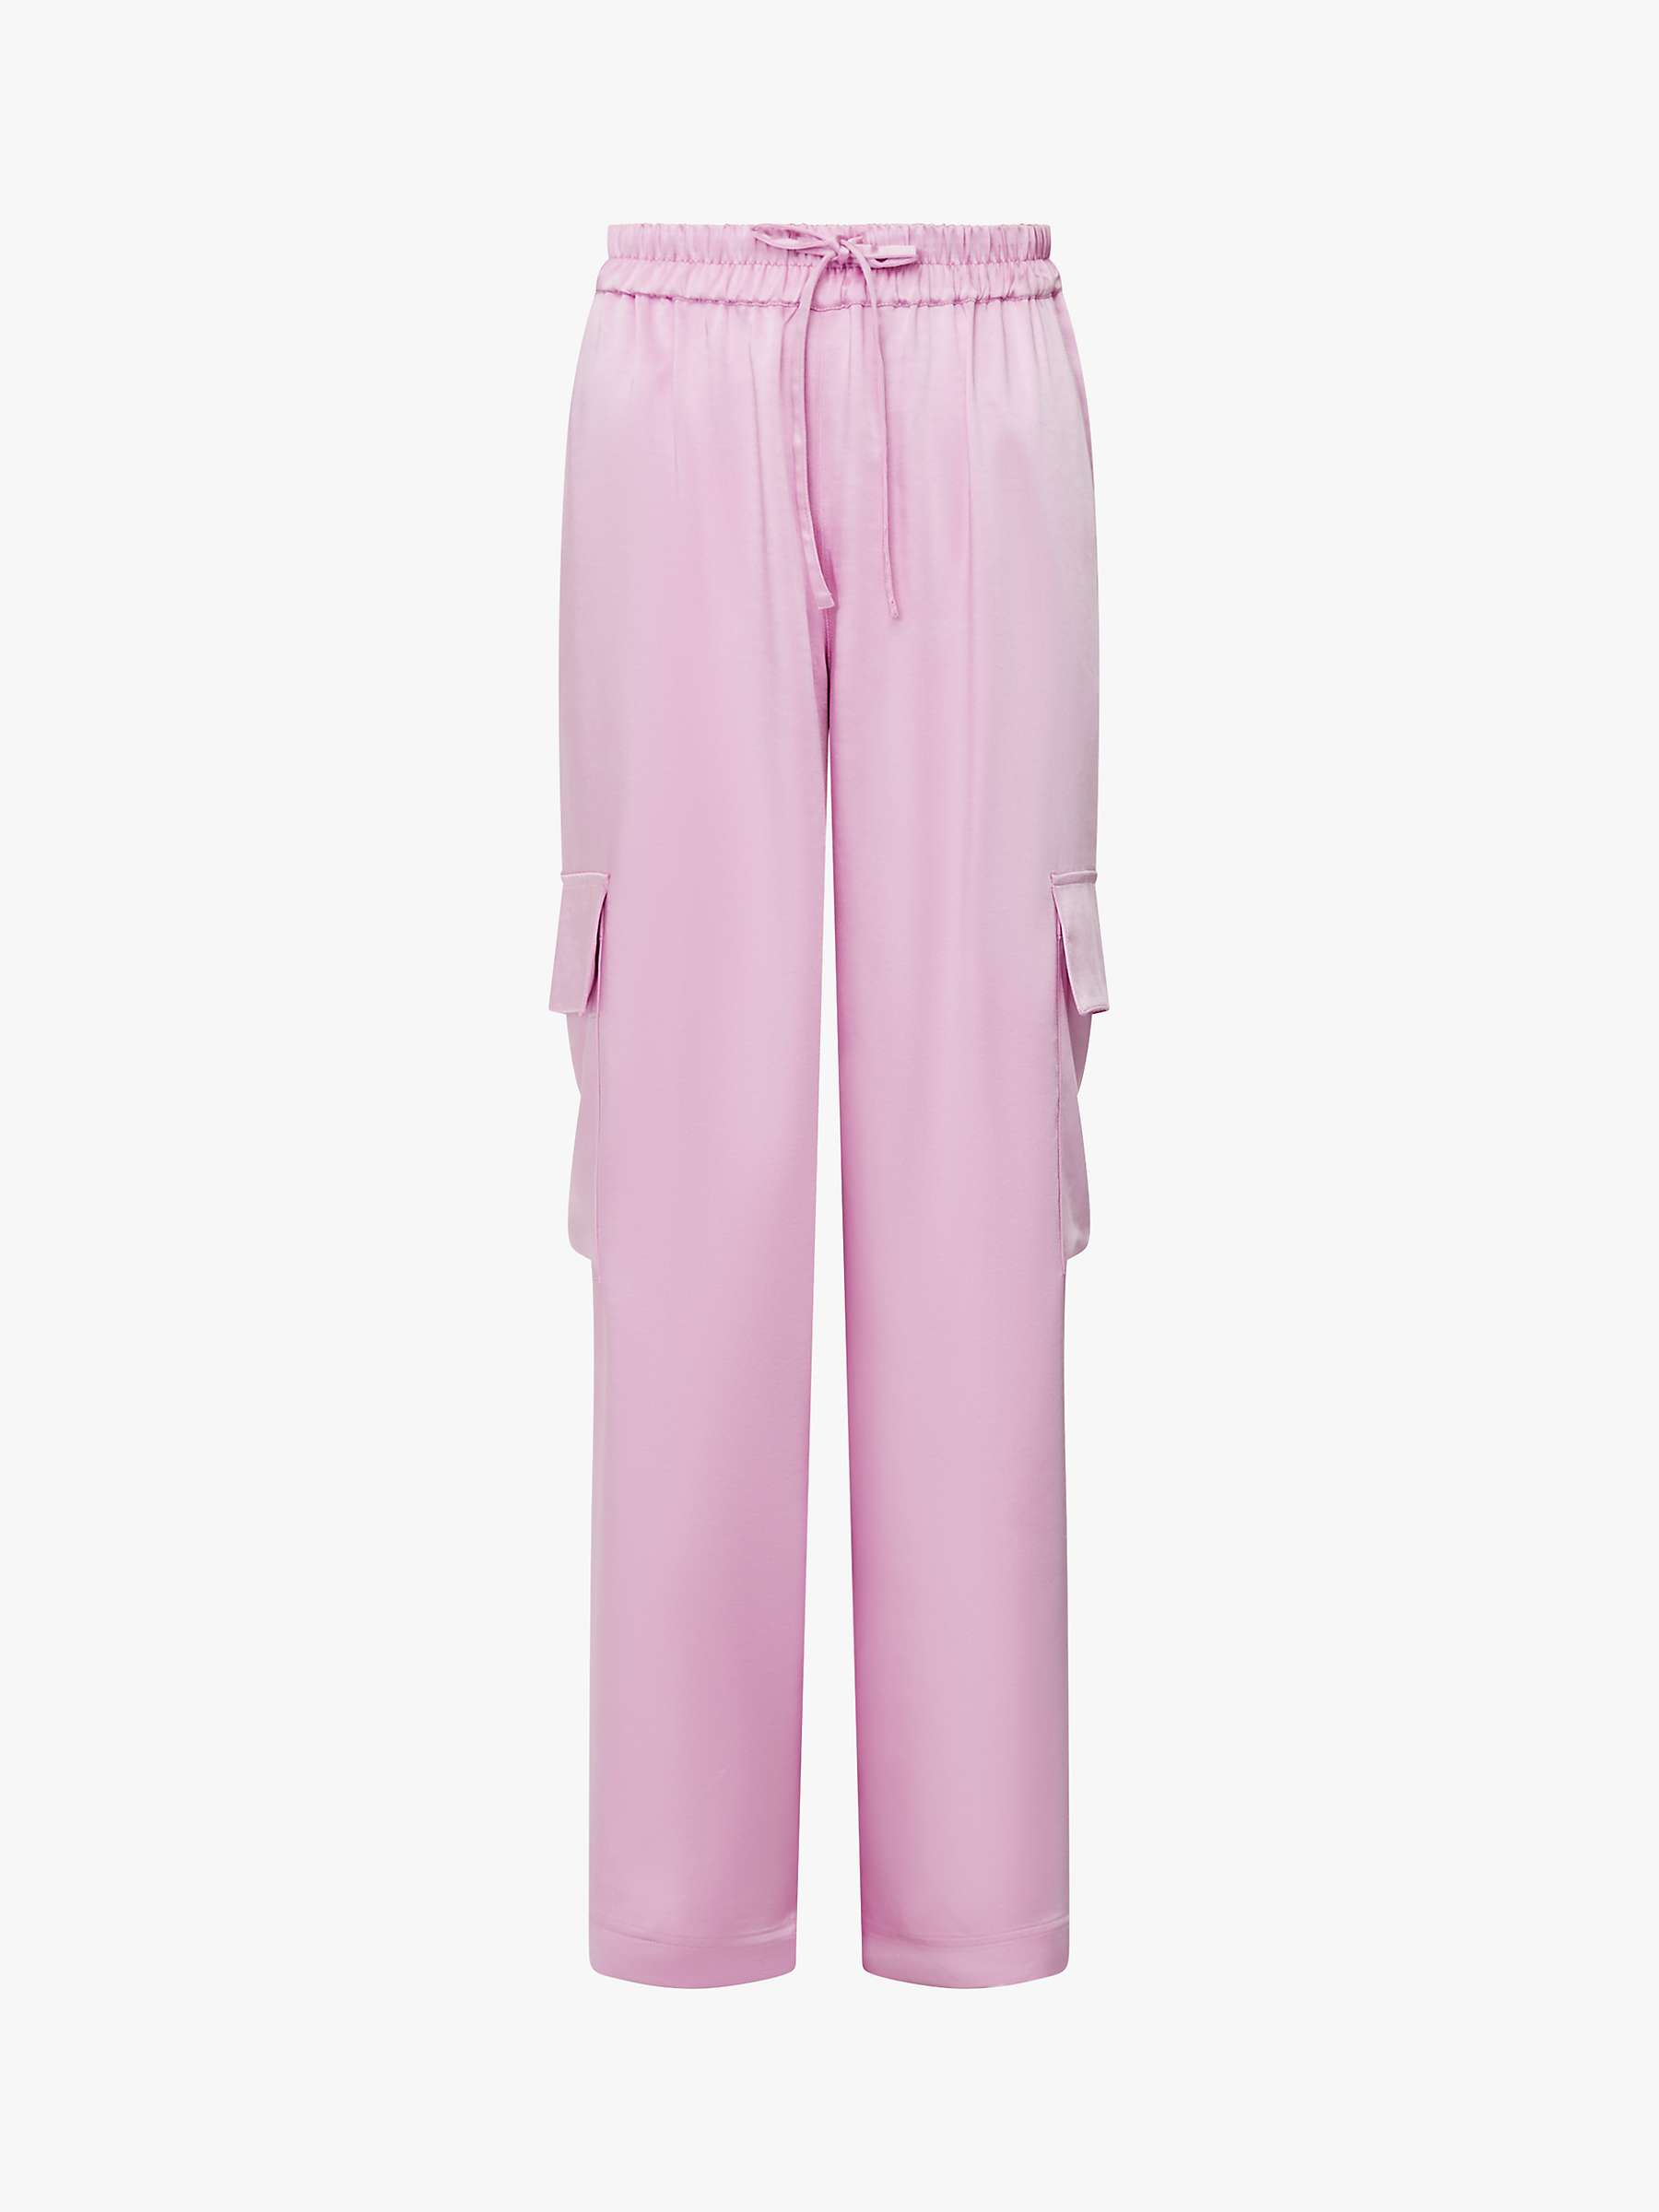 Buy French Connection Chloetta Cargo Trousers Online at johnlewis.com